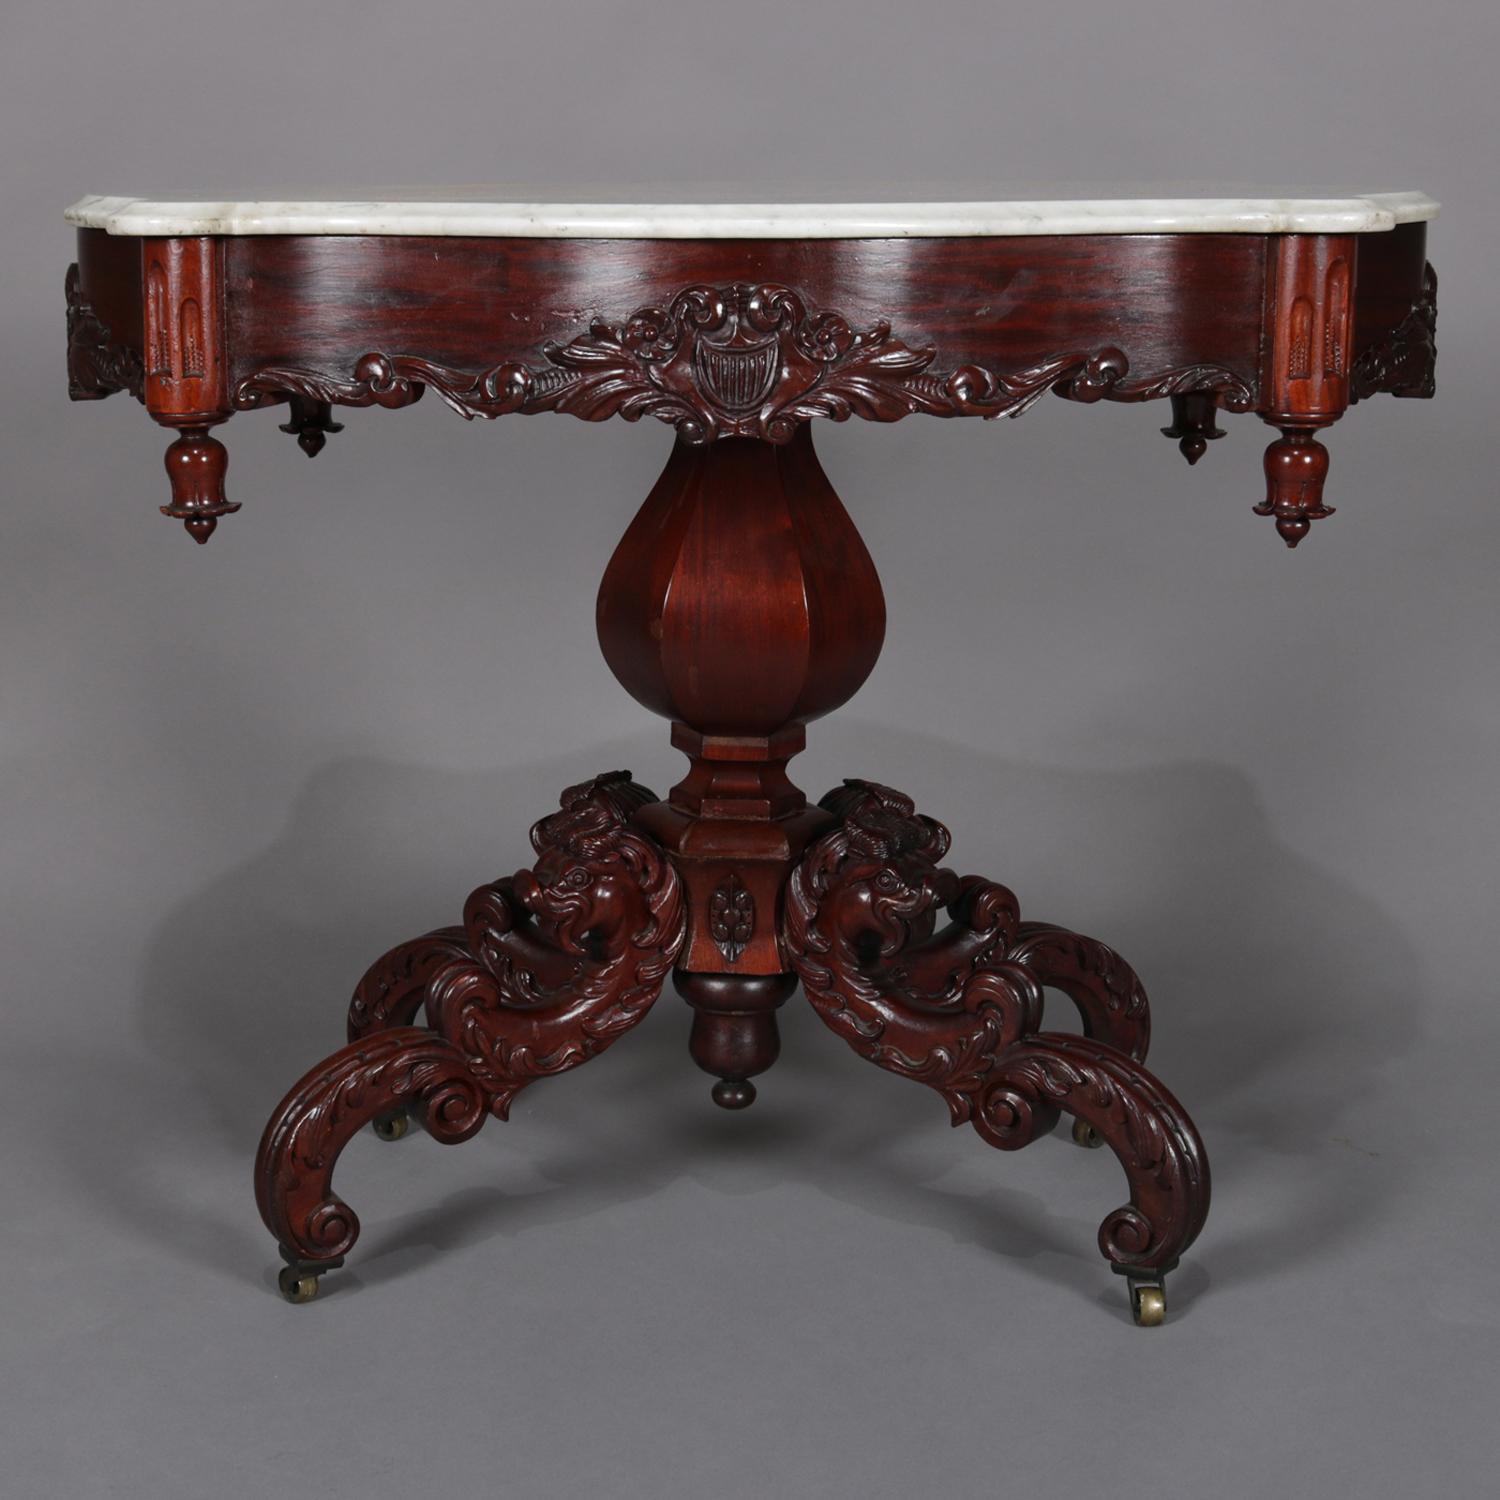 Antique high Victorian centre table features shaped and bevelled marble turtle top seated on carved rosewood base with skirt having central carved foliate with shield design and corner drop finials above faceted gourd from plinth raised on four